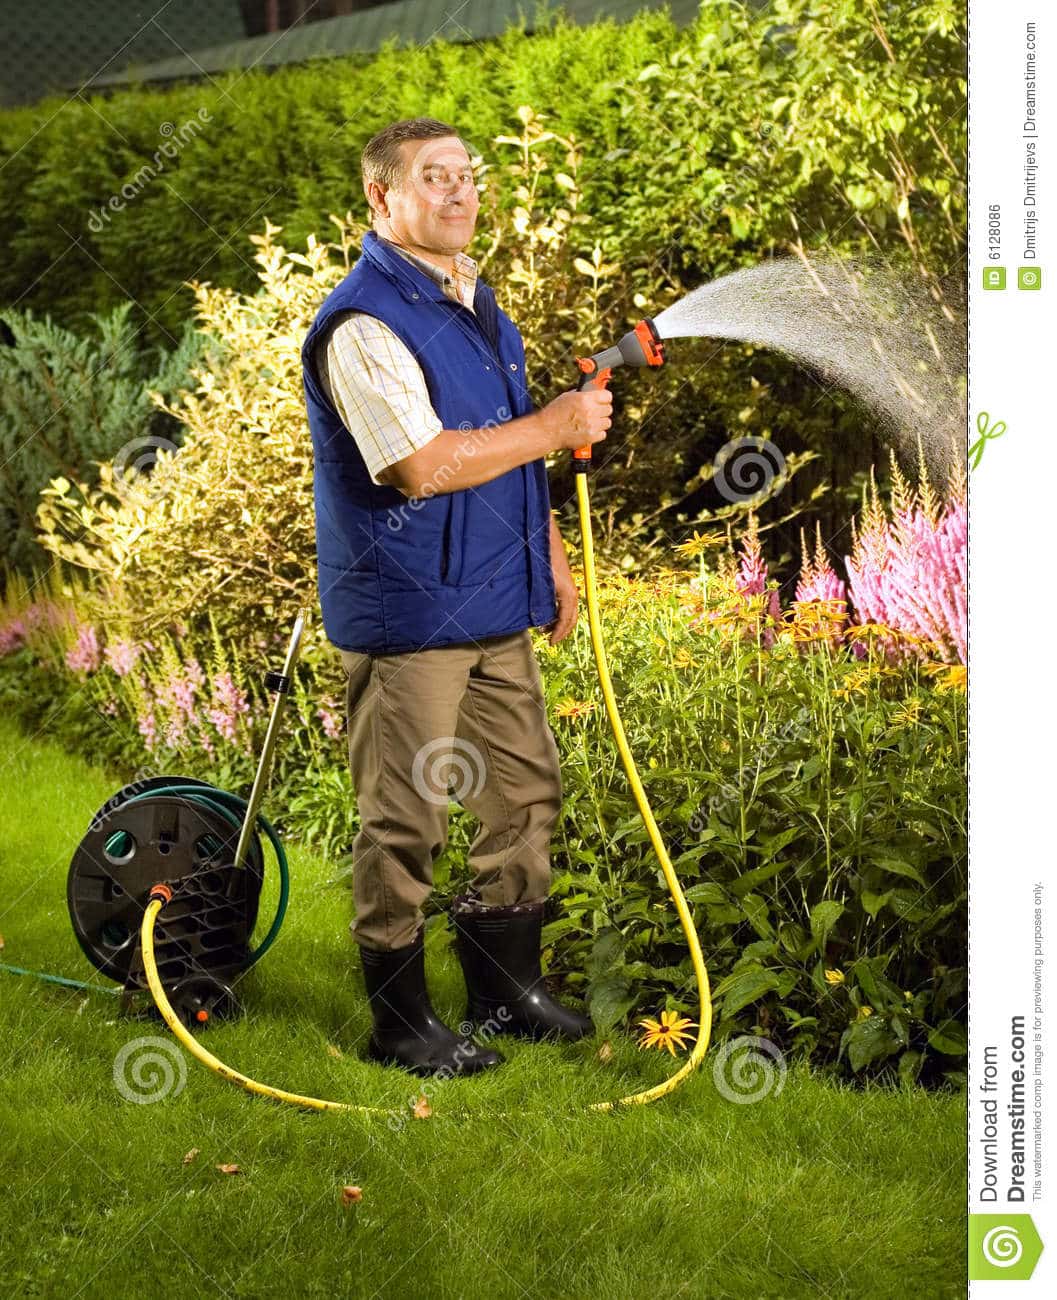 Senior Man Watering Flowers In The Garden Royalty Free Stock Image ...